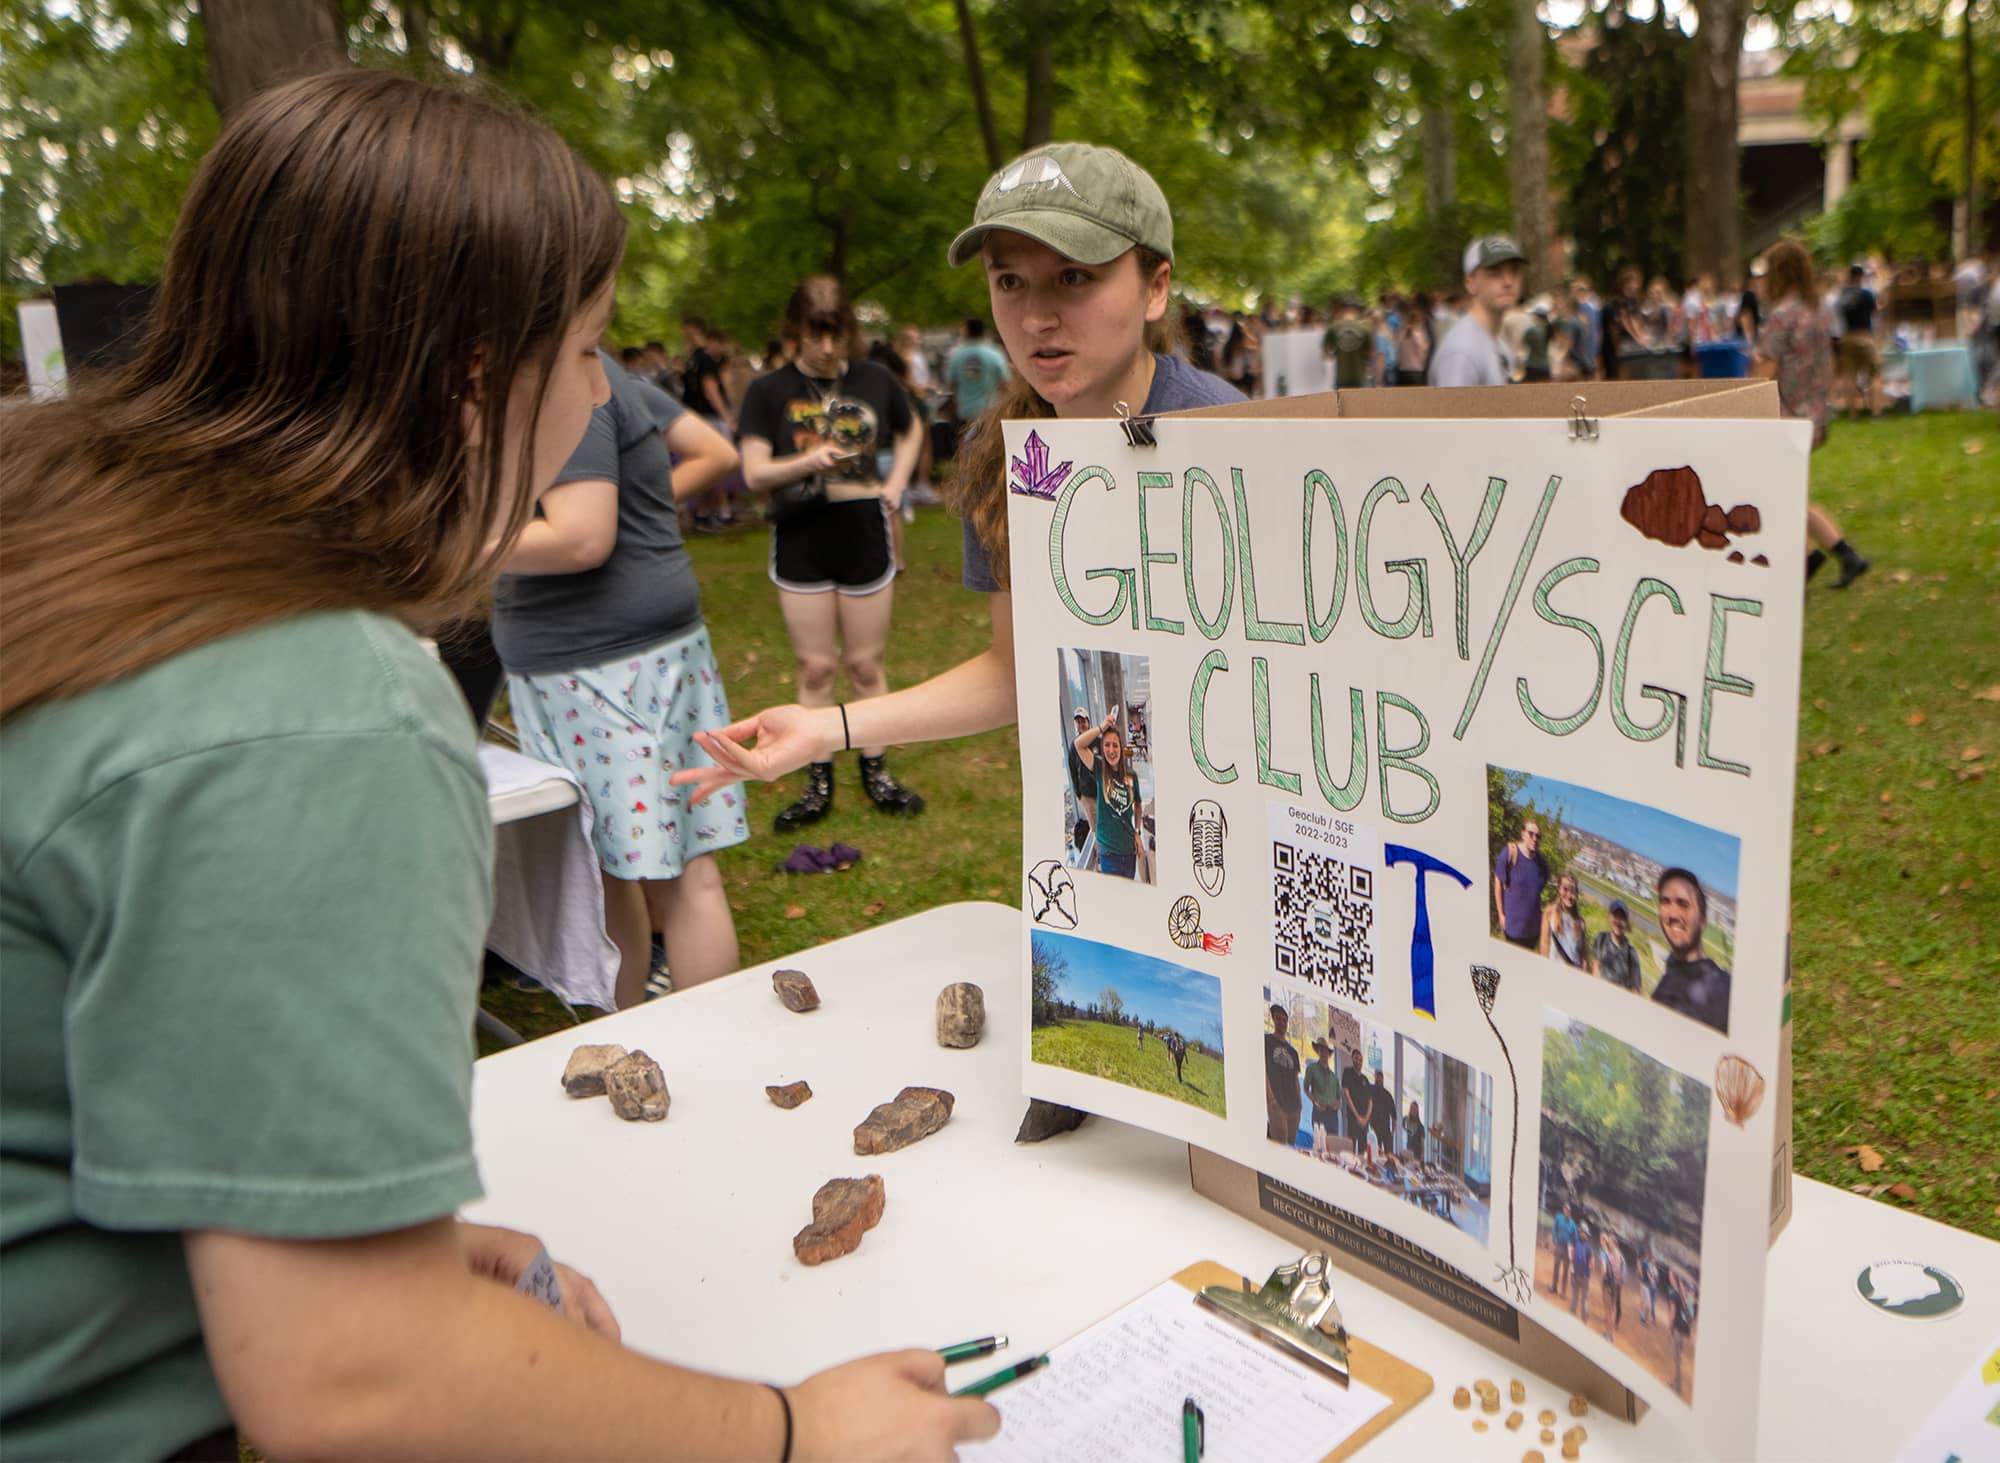 A member of the Geology Club recruits students at Student Organization Involvement Fair on College Green.